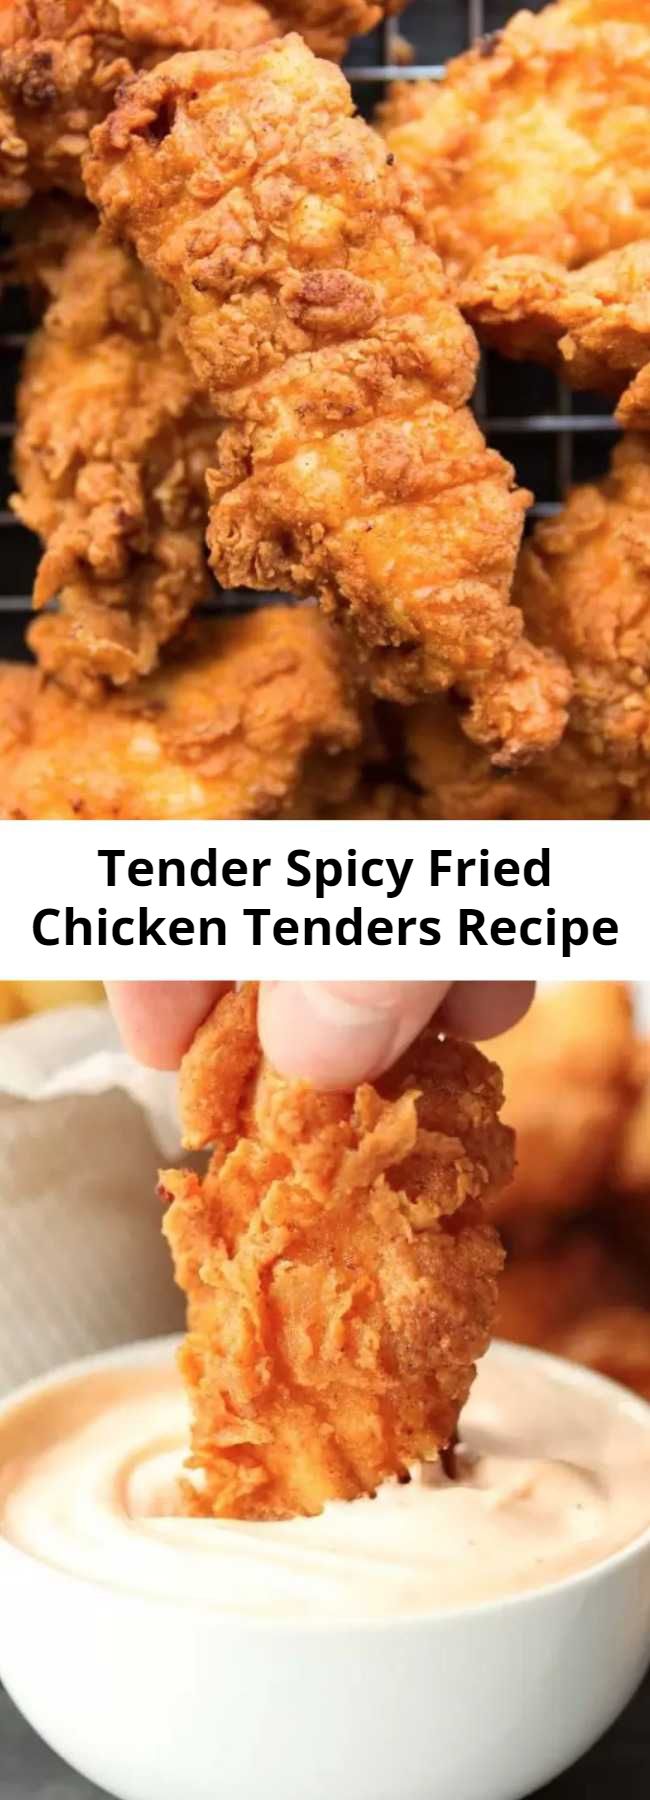 Tender Spicy Fried Chicken Tenders Recipe - These Spicy Chicken Tenders are ridiculously delicious! Chicken strips marinated in buttermilk and hot sauce, then deep fried for extra crispiness. Need I say more?! #chicken #chickentenders #chickenstrips #spicychicken #friedchicken